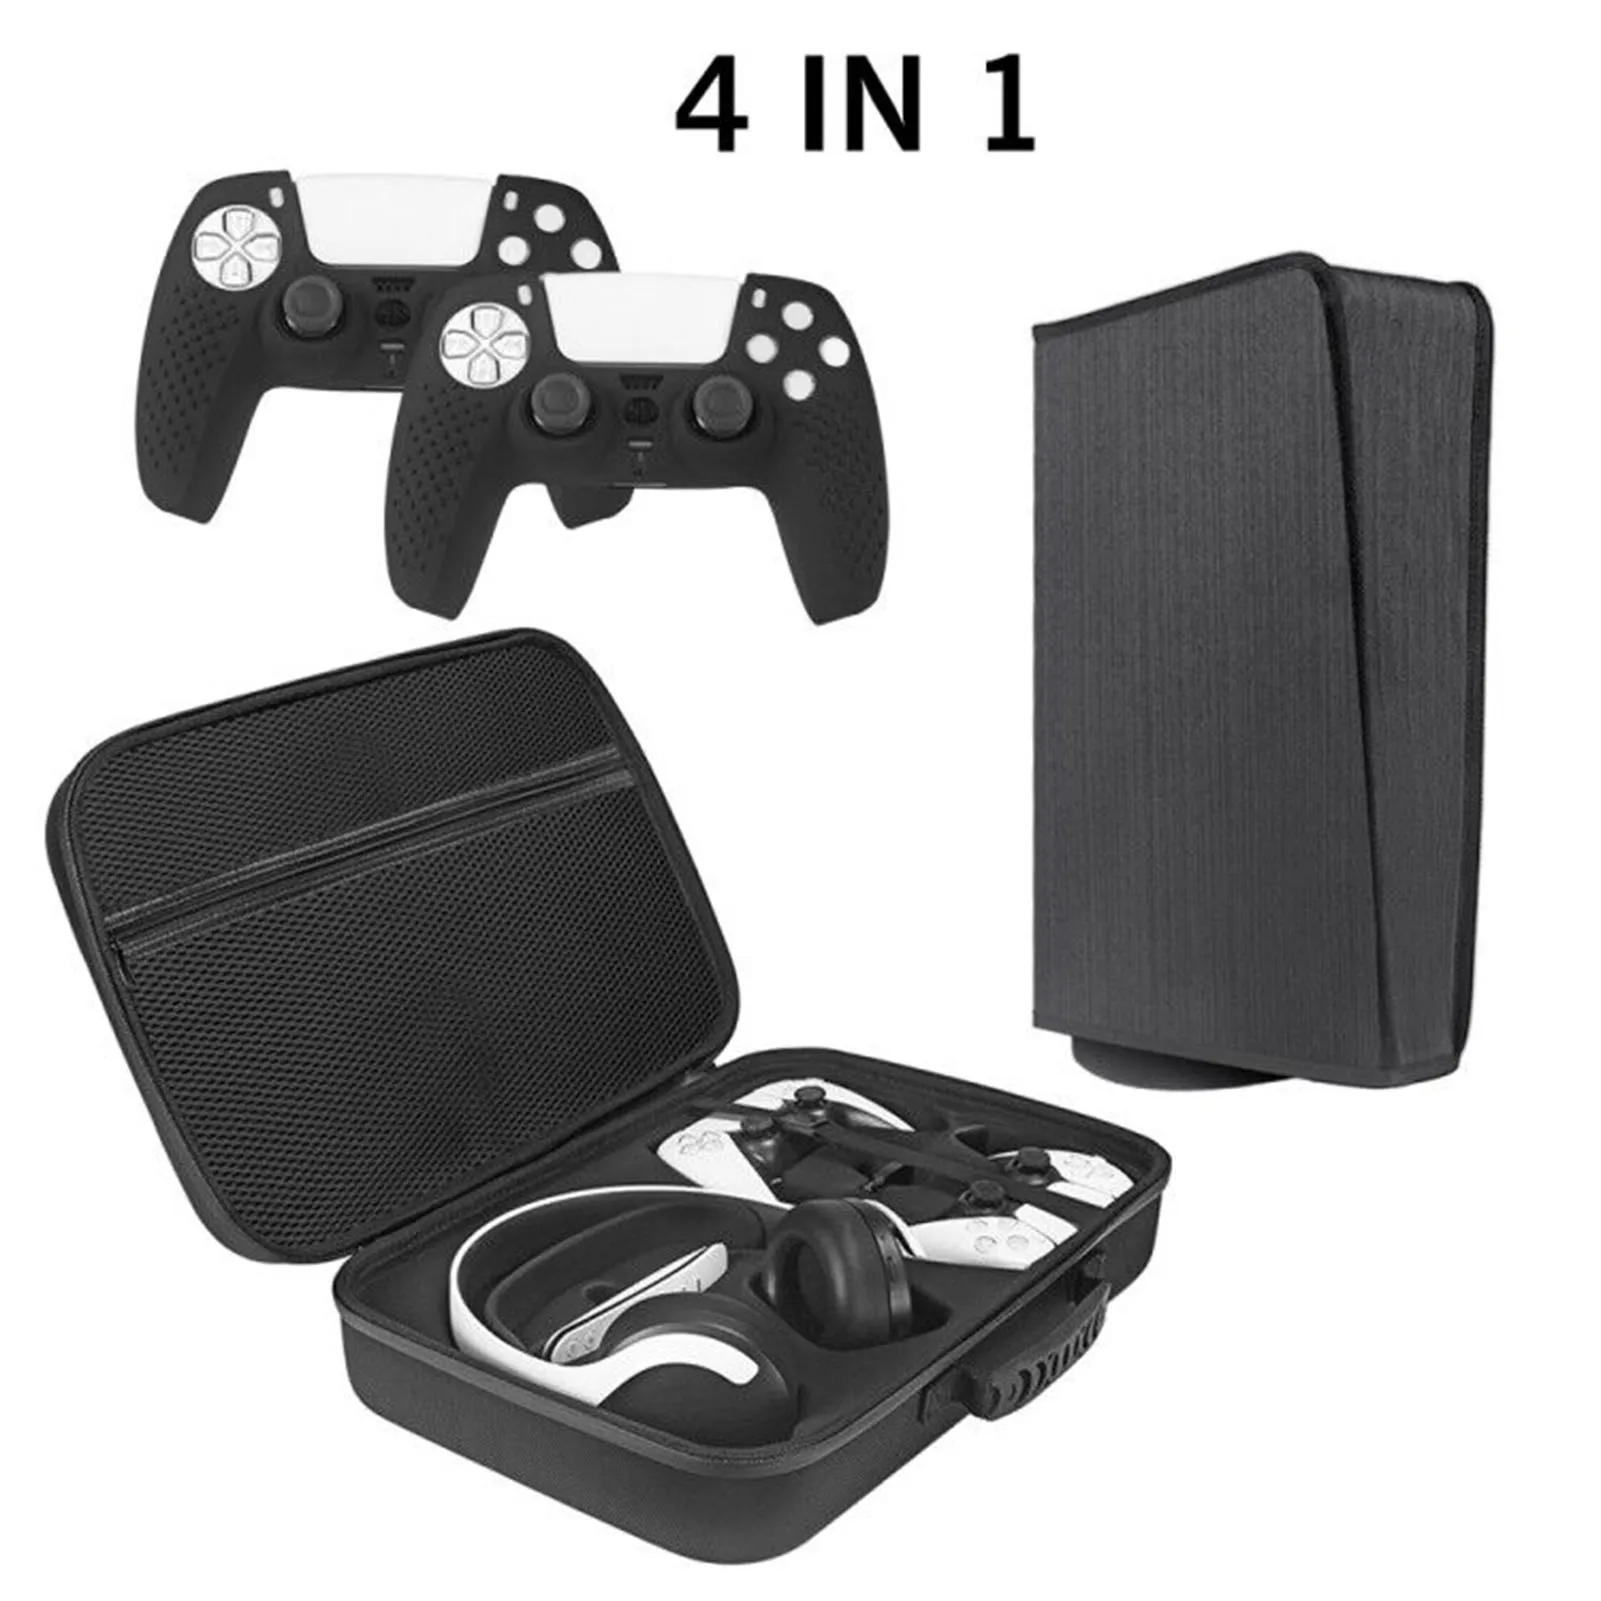 

4in1 DustProof Cover For PS5 Console Silicone Cover Controller Protector Sleeve For PS5 Playstation 5 Headphone Storage Bag Case